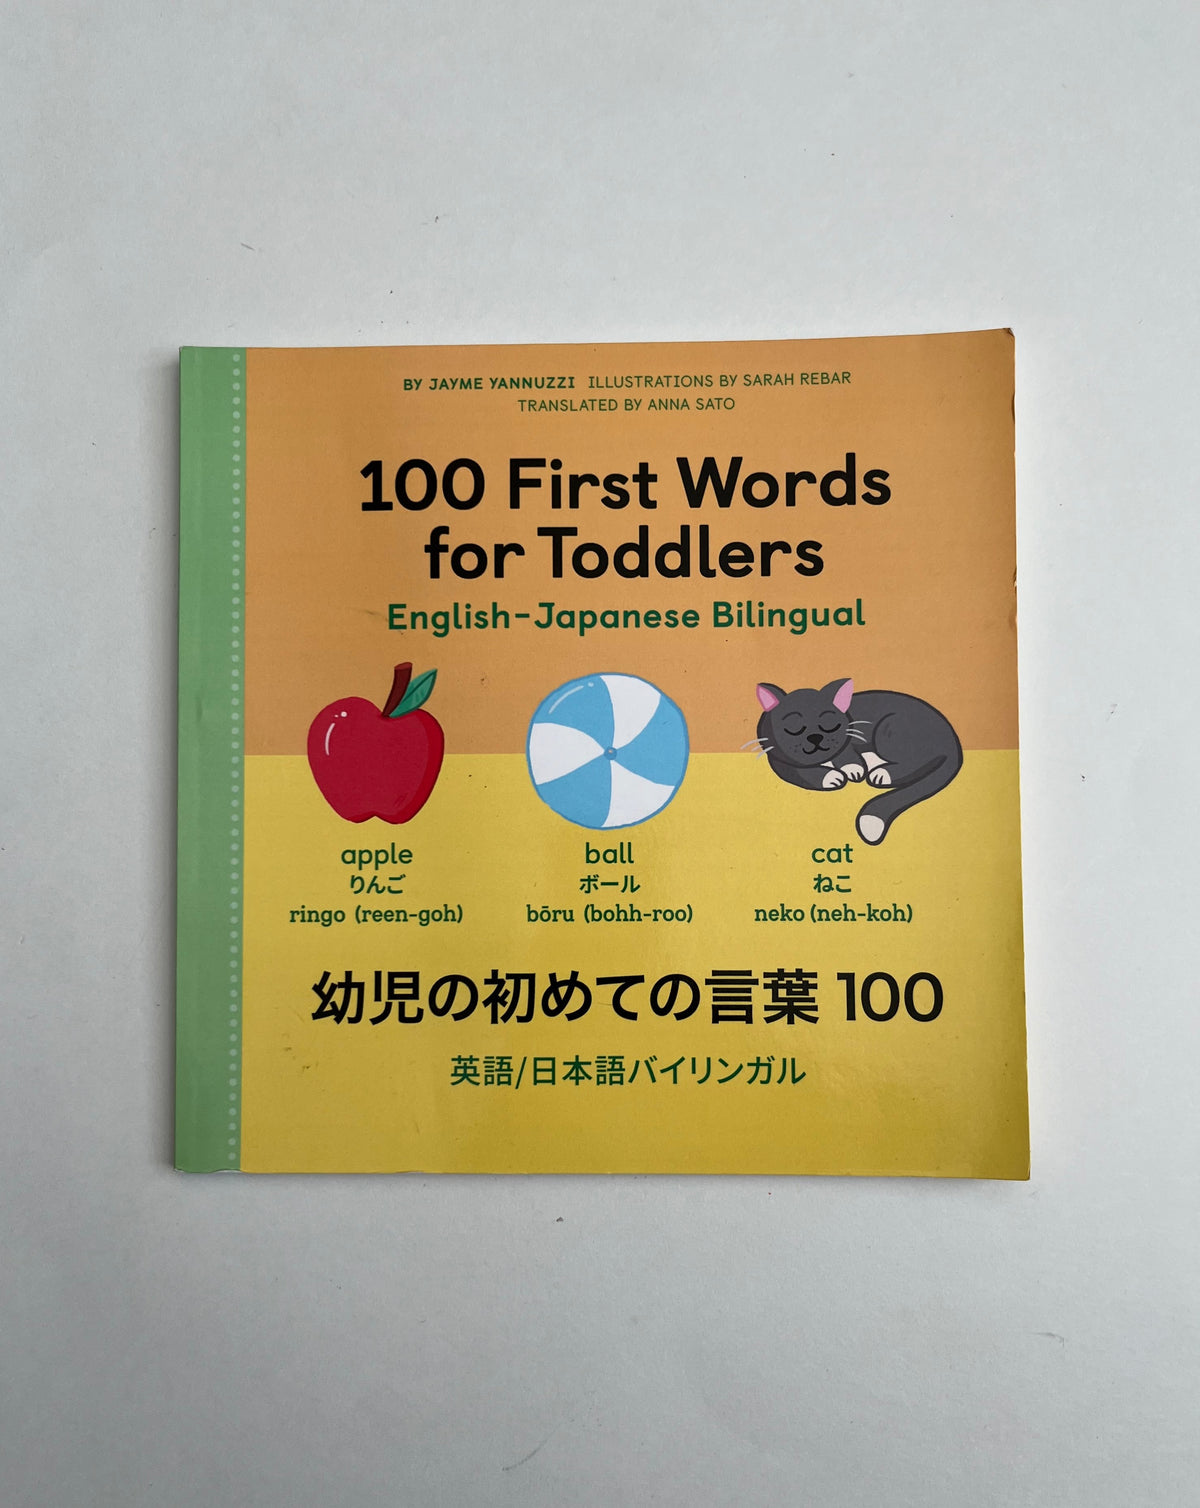 100 First Words for Toddlers English-Japanese Bilingual by Jayme Yannuzzi